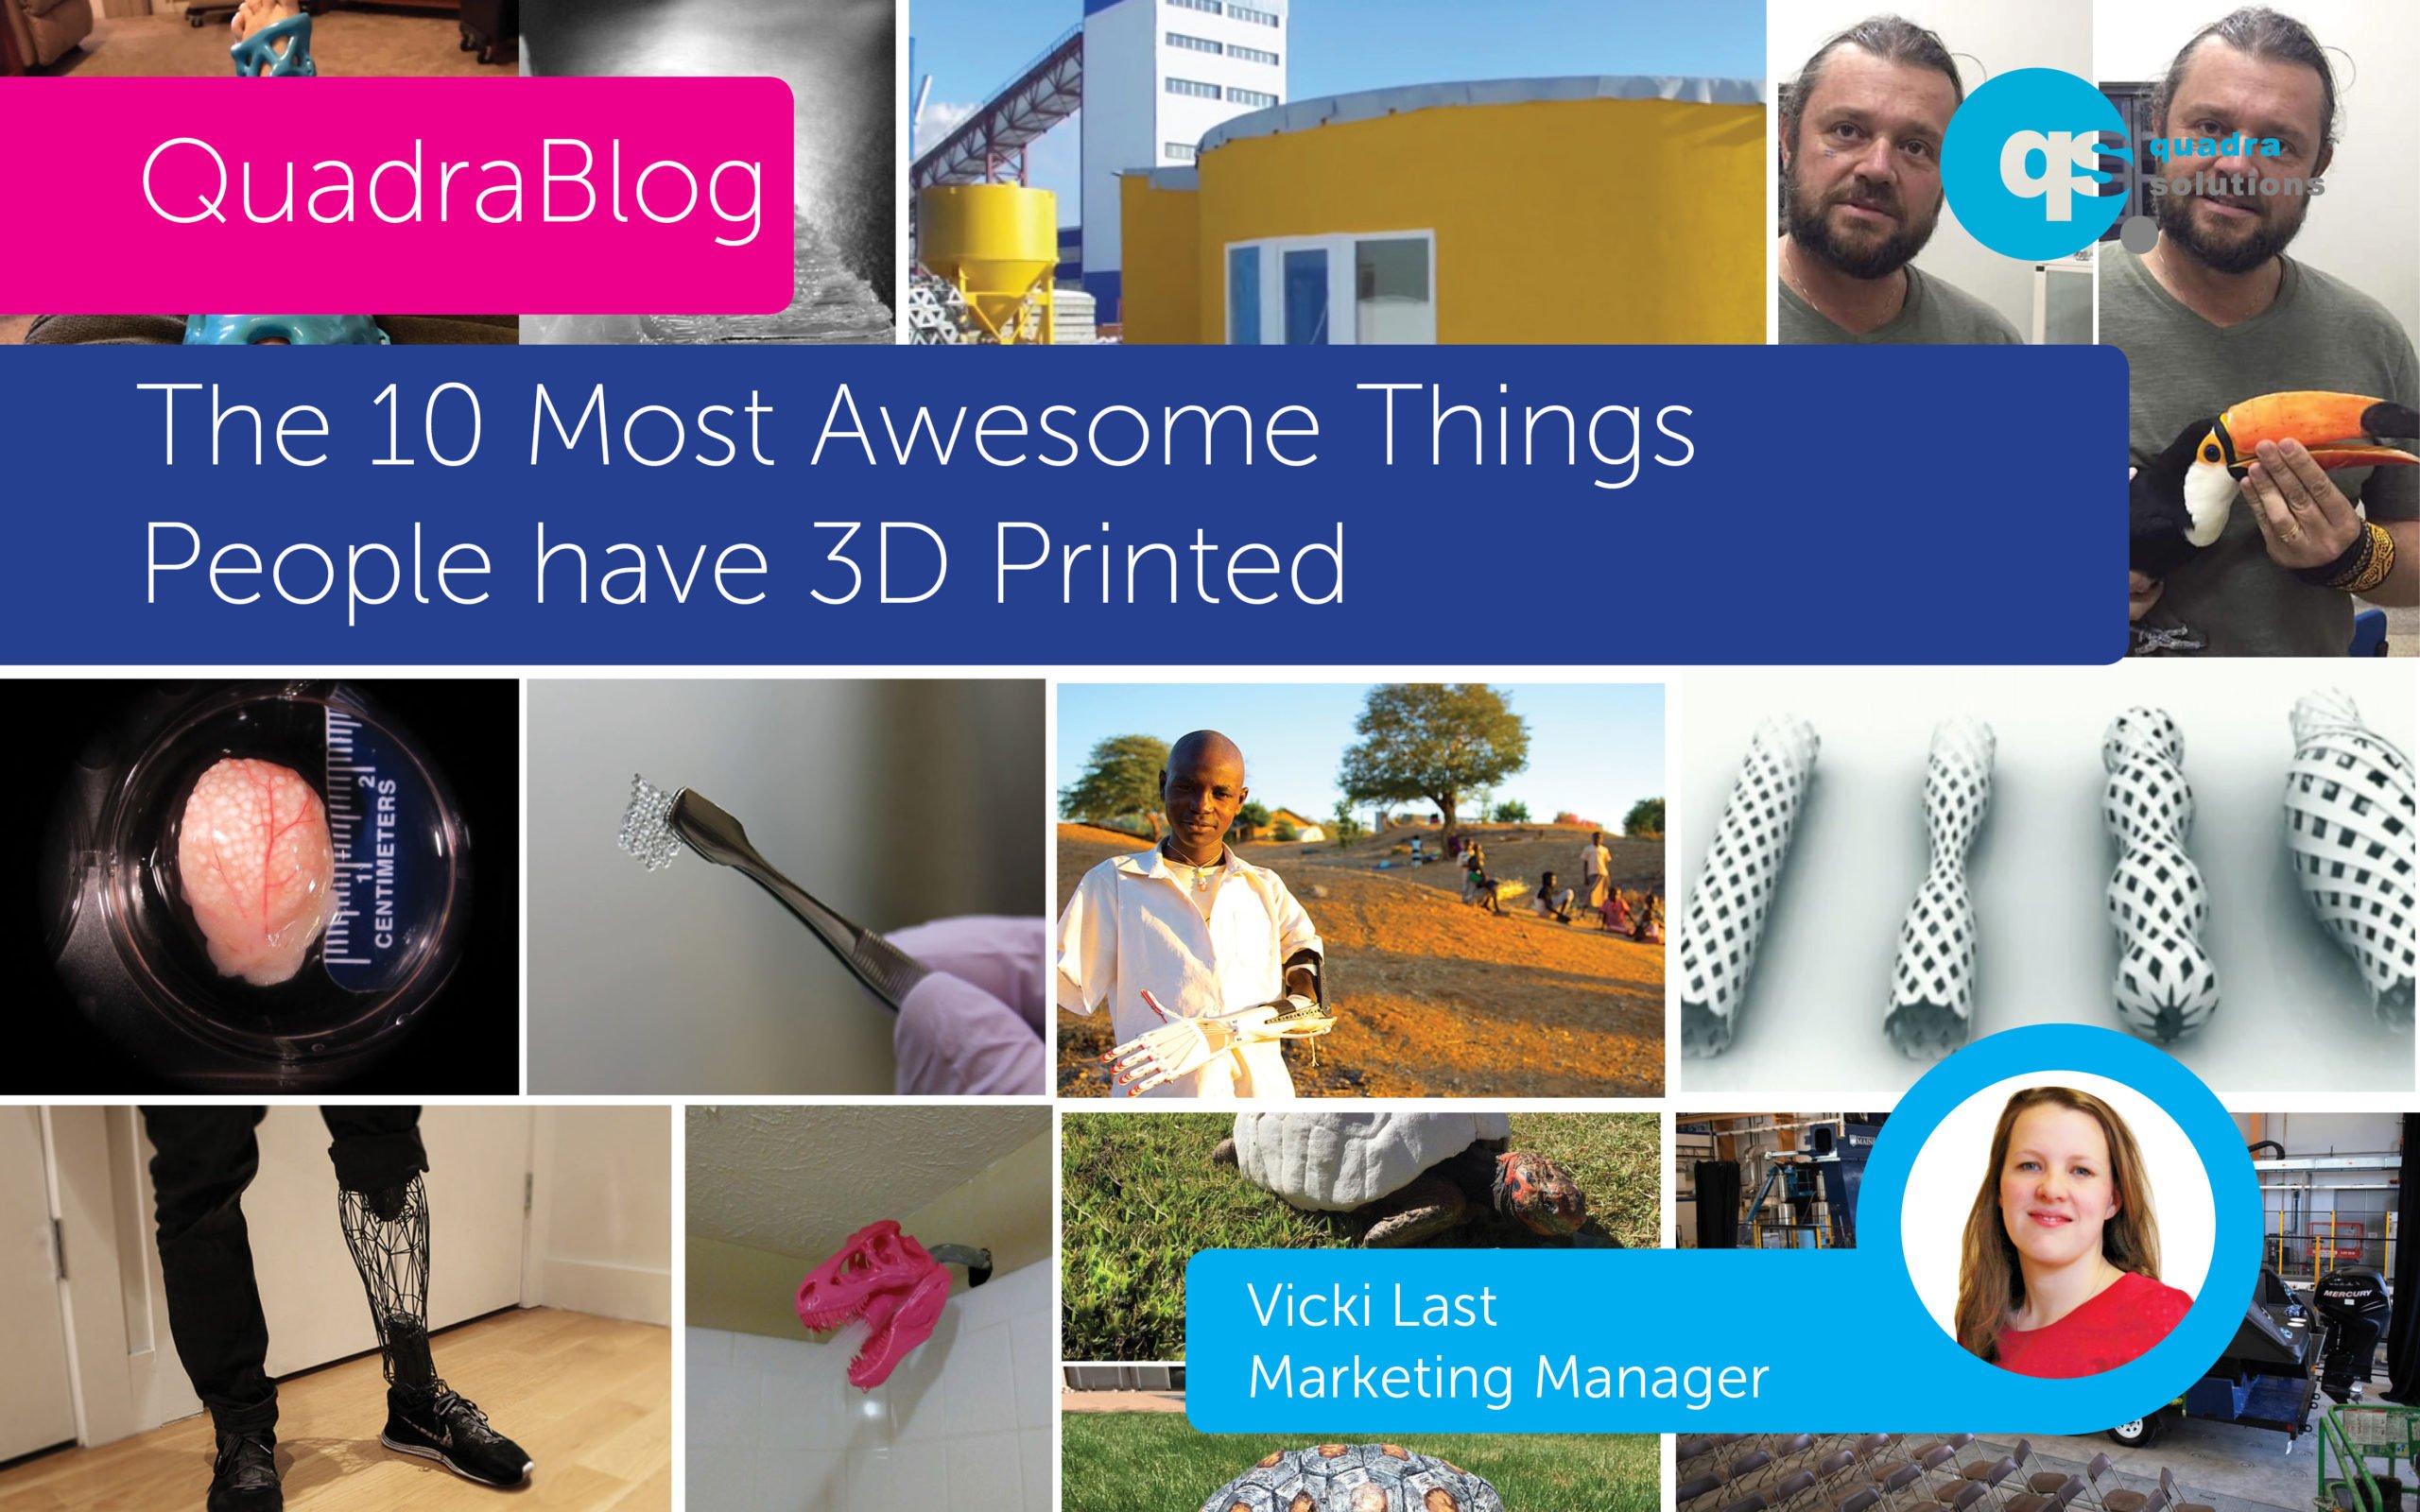 The 10 Most Awesome Things People have 3D Printed